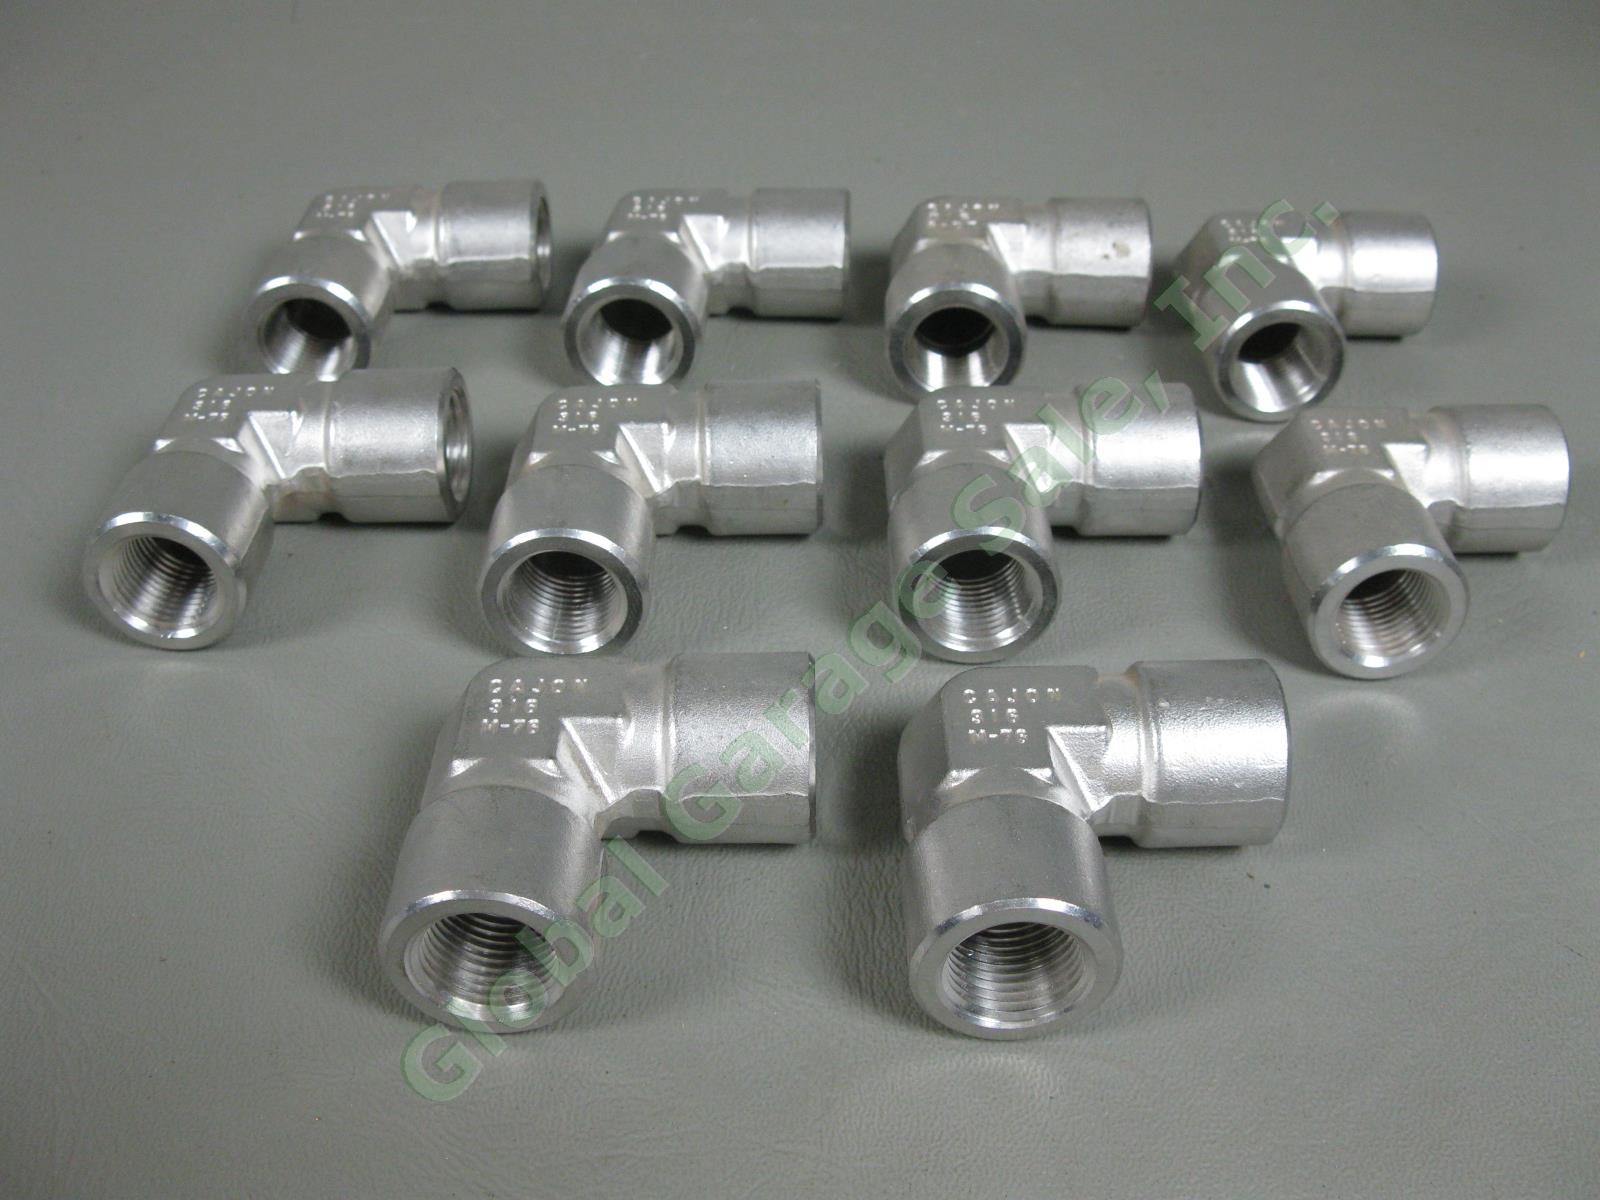 10 Cajun-316 3/8" Female 90° Degree Stainless Steel Elbow Lot SS M-76 Fitting NR 1